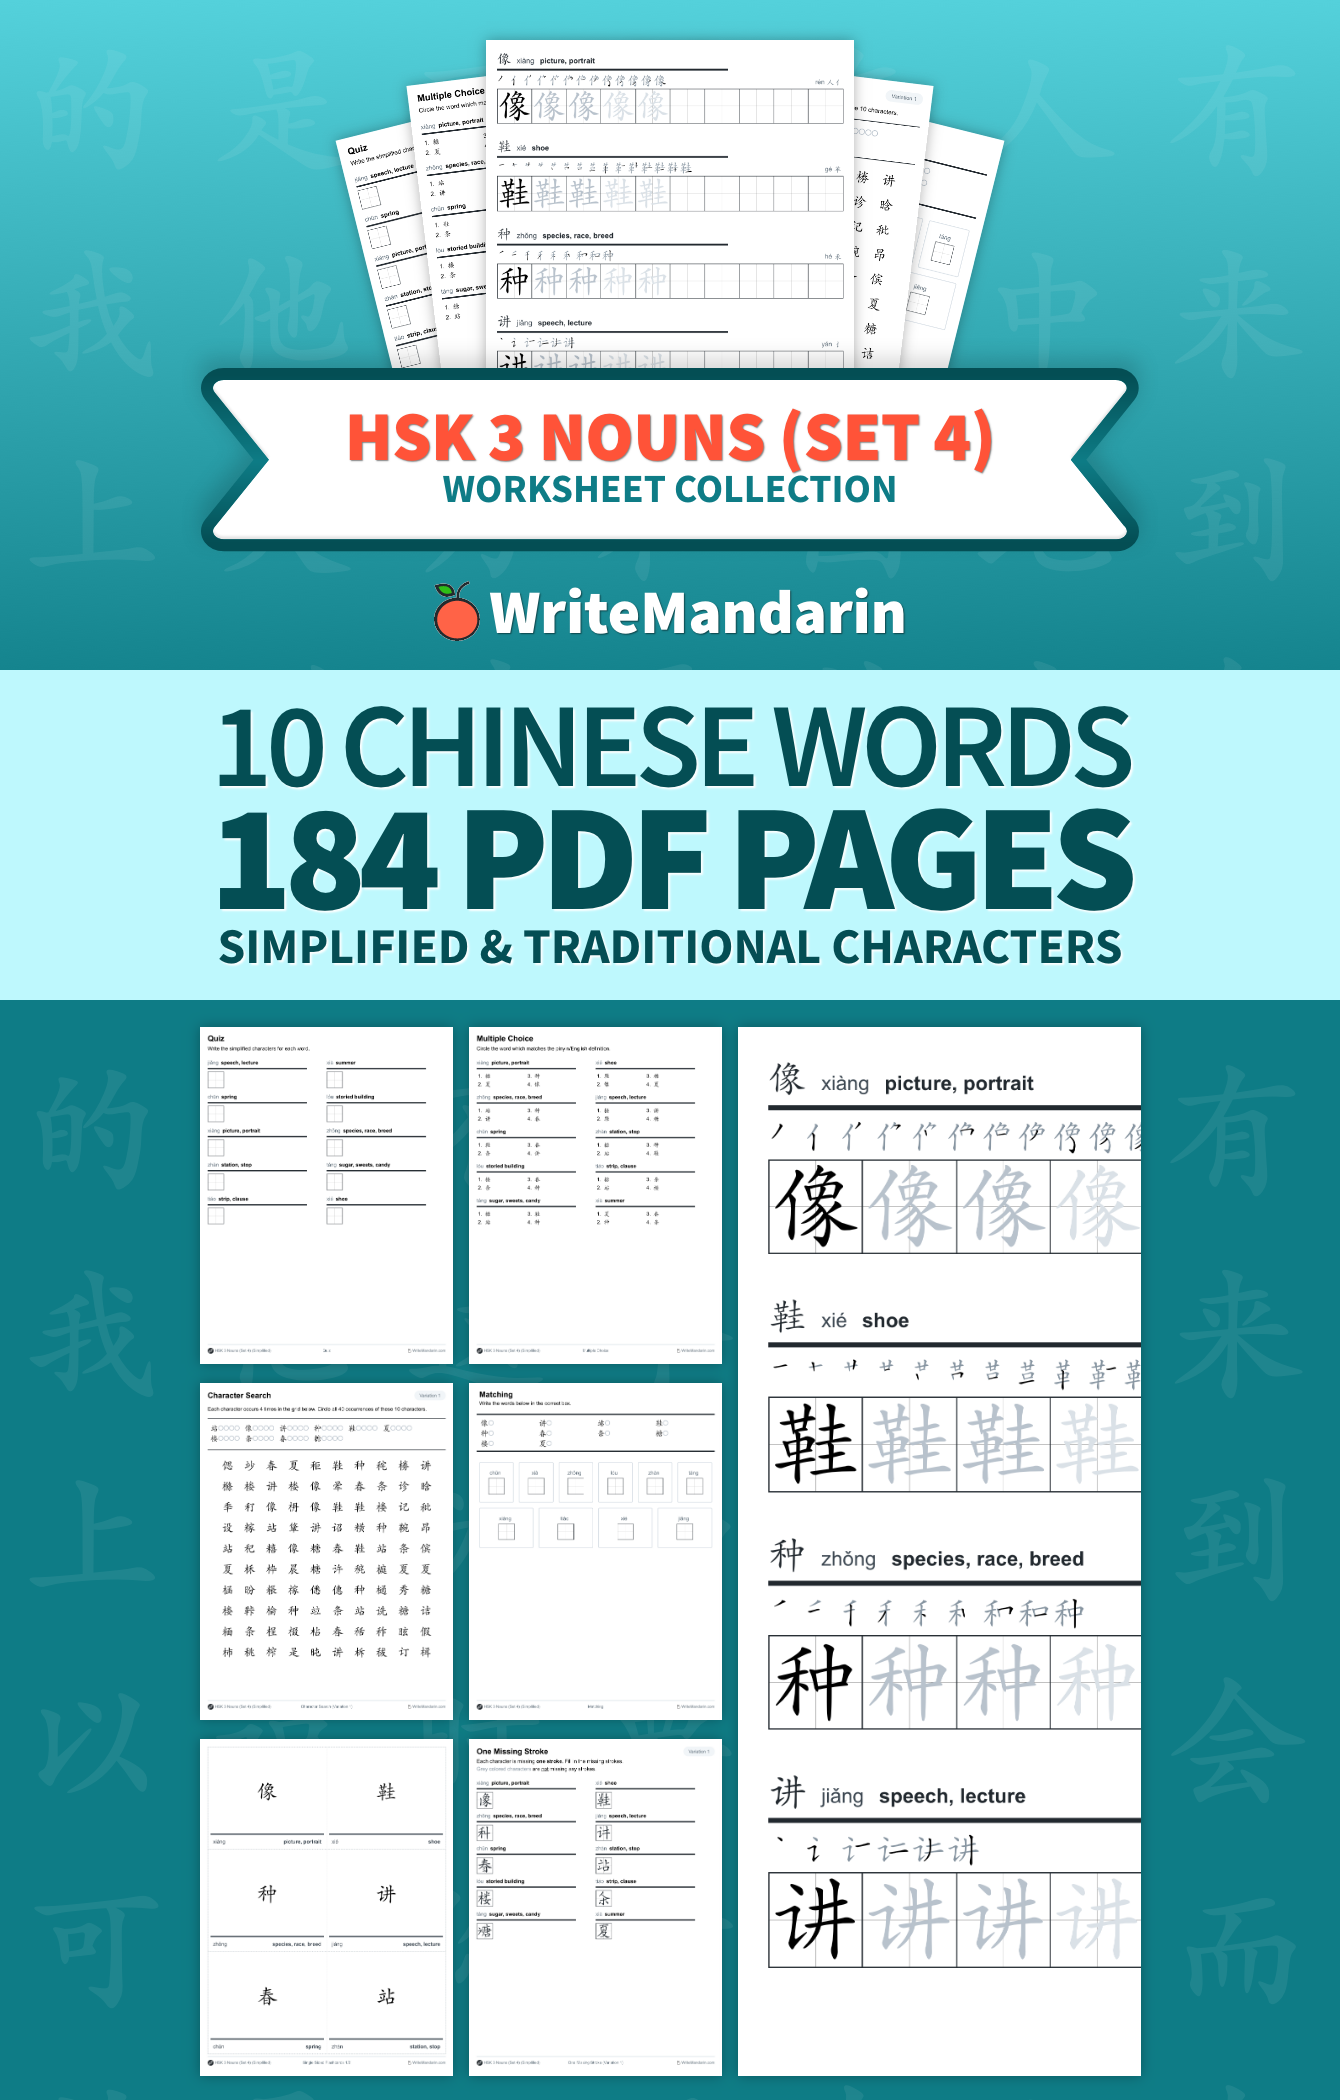 Preview image of HSK 3 Nouns (Set 4) worksheet collection